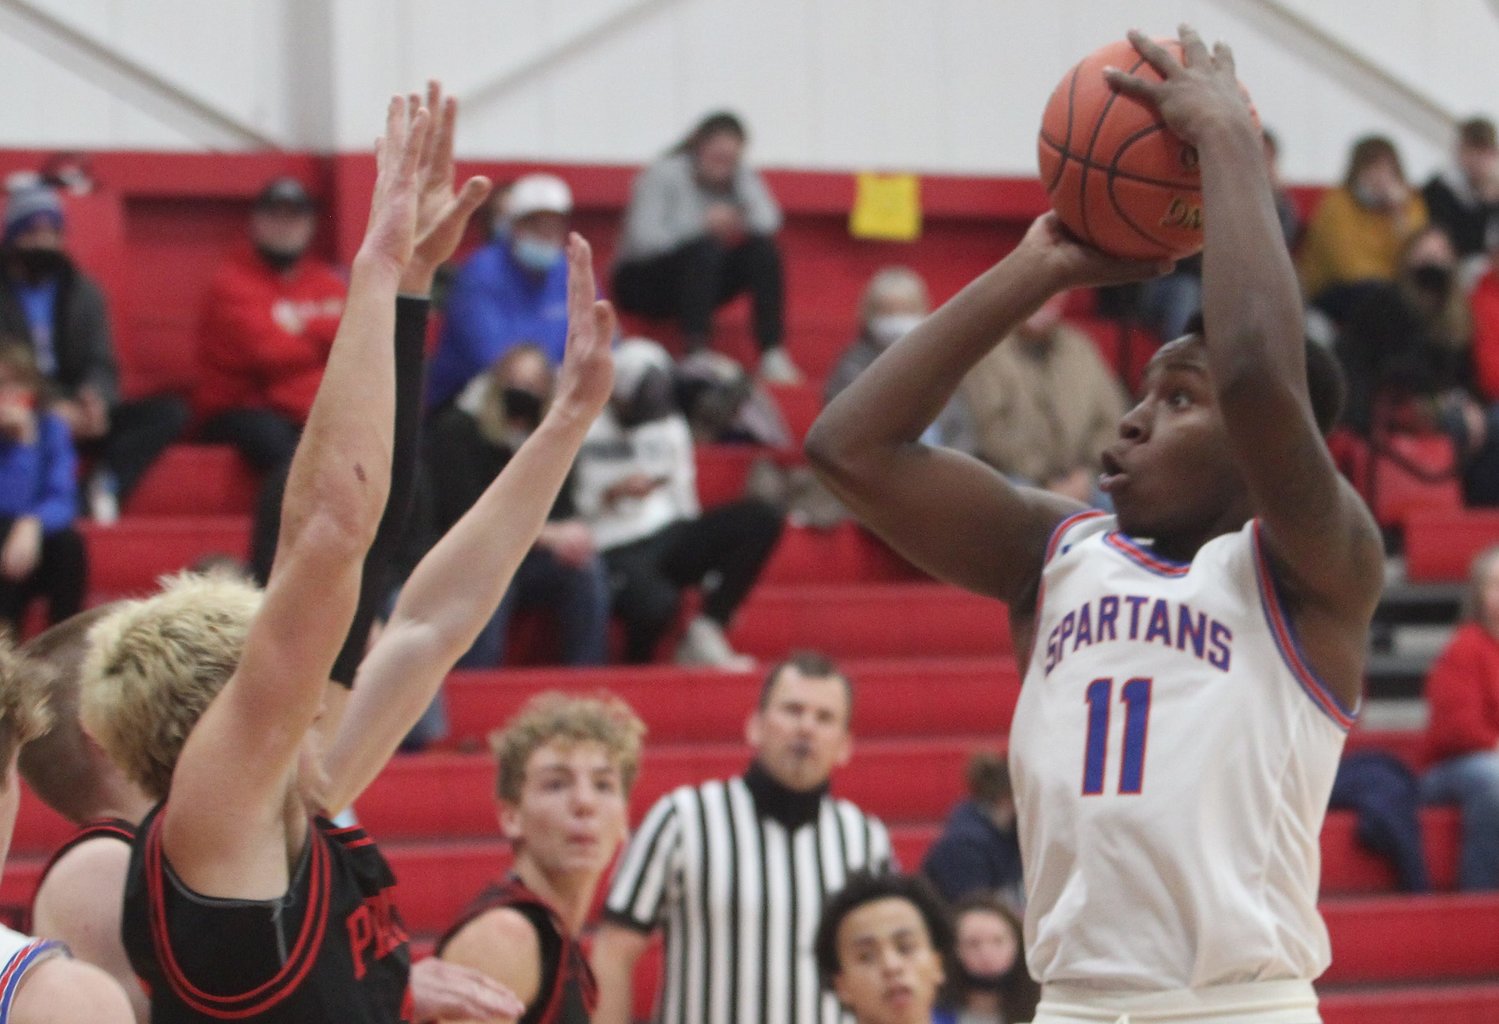 Moberly High School sophomore Derieus Wallace (#11) scored 12 points Tuesday during the Spartan boys season ending 65-49 loss to Kirksville in a Class 5 District 15 semifinal game.